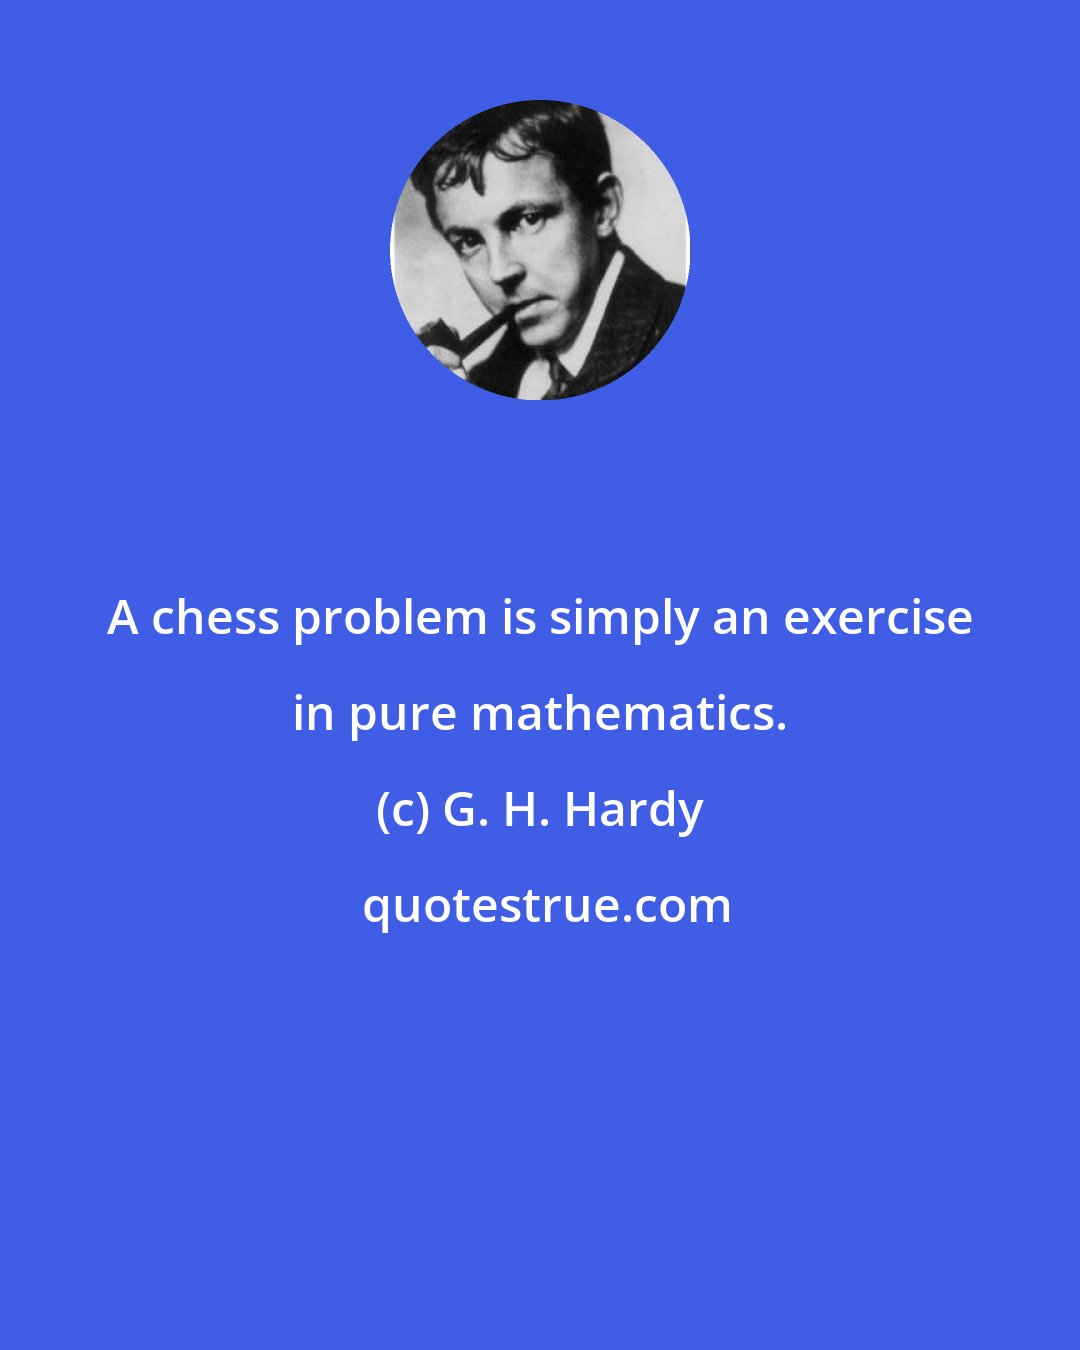 G. H. Hardy: A chess problem is simply an exercise in pure mathematics.